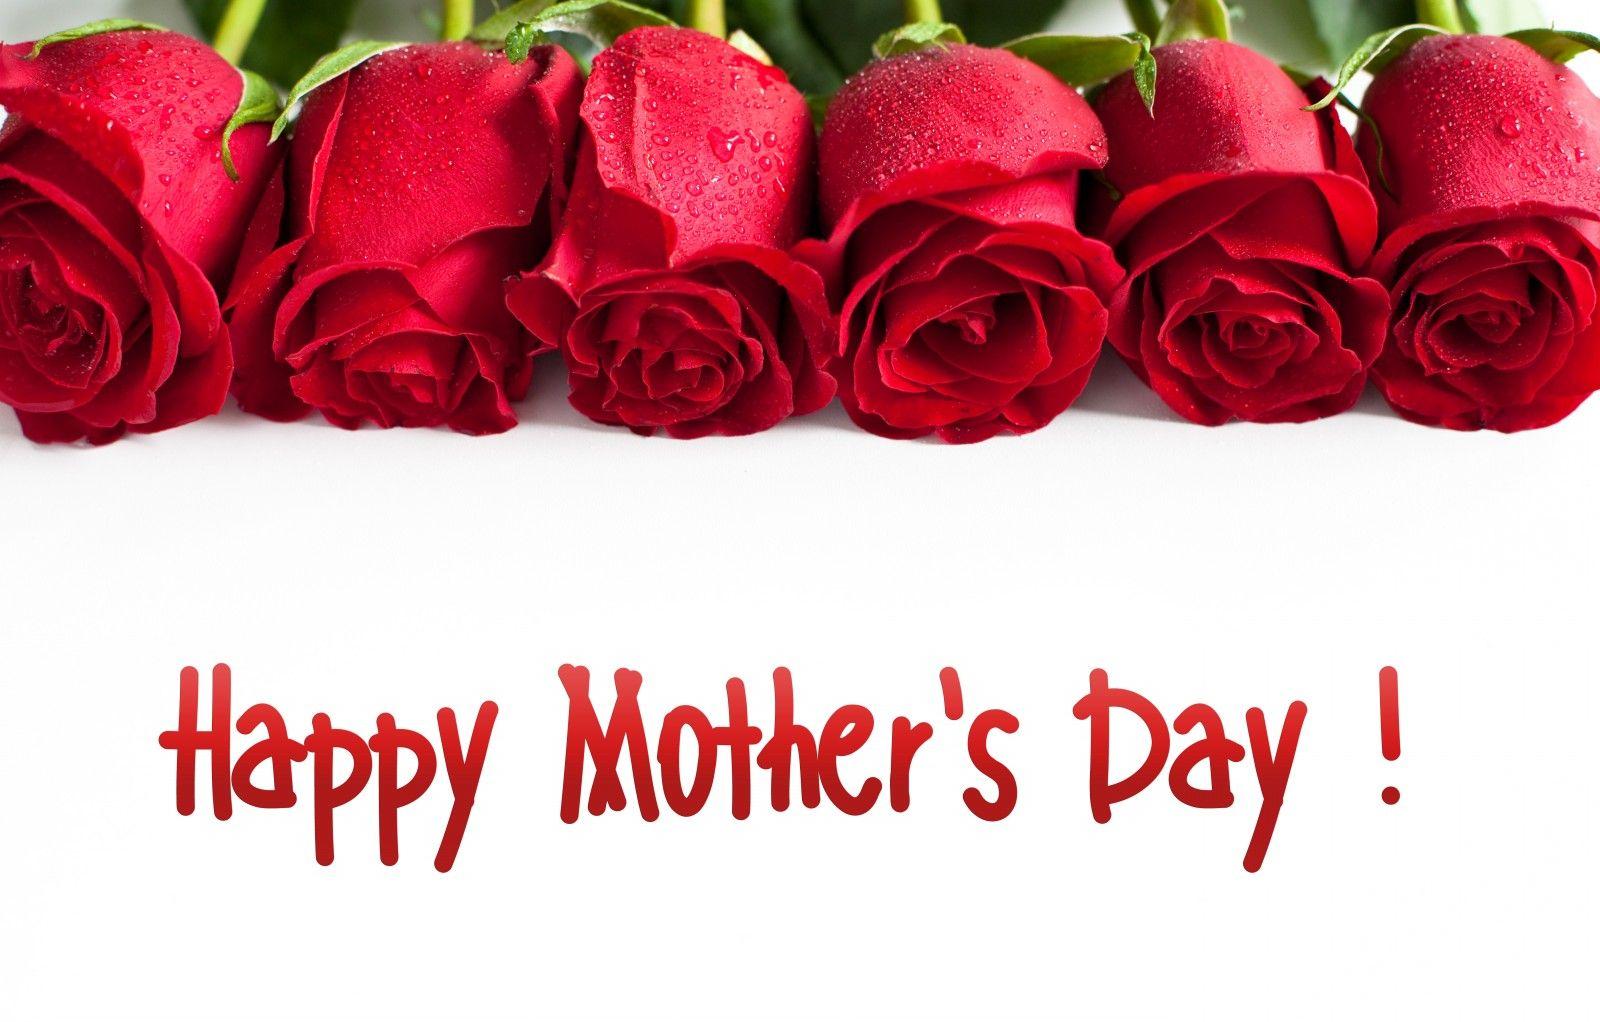 Happy Mothers Day Image, Wallpaper and Greetings